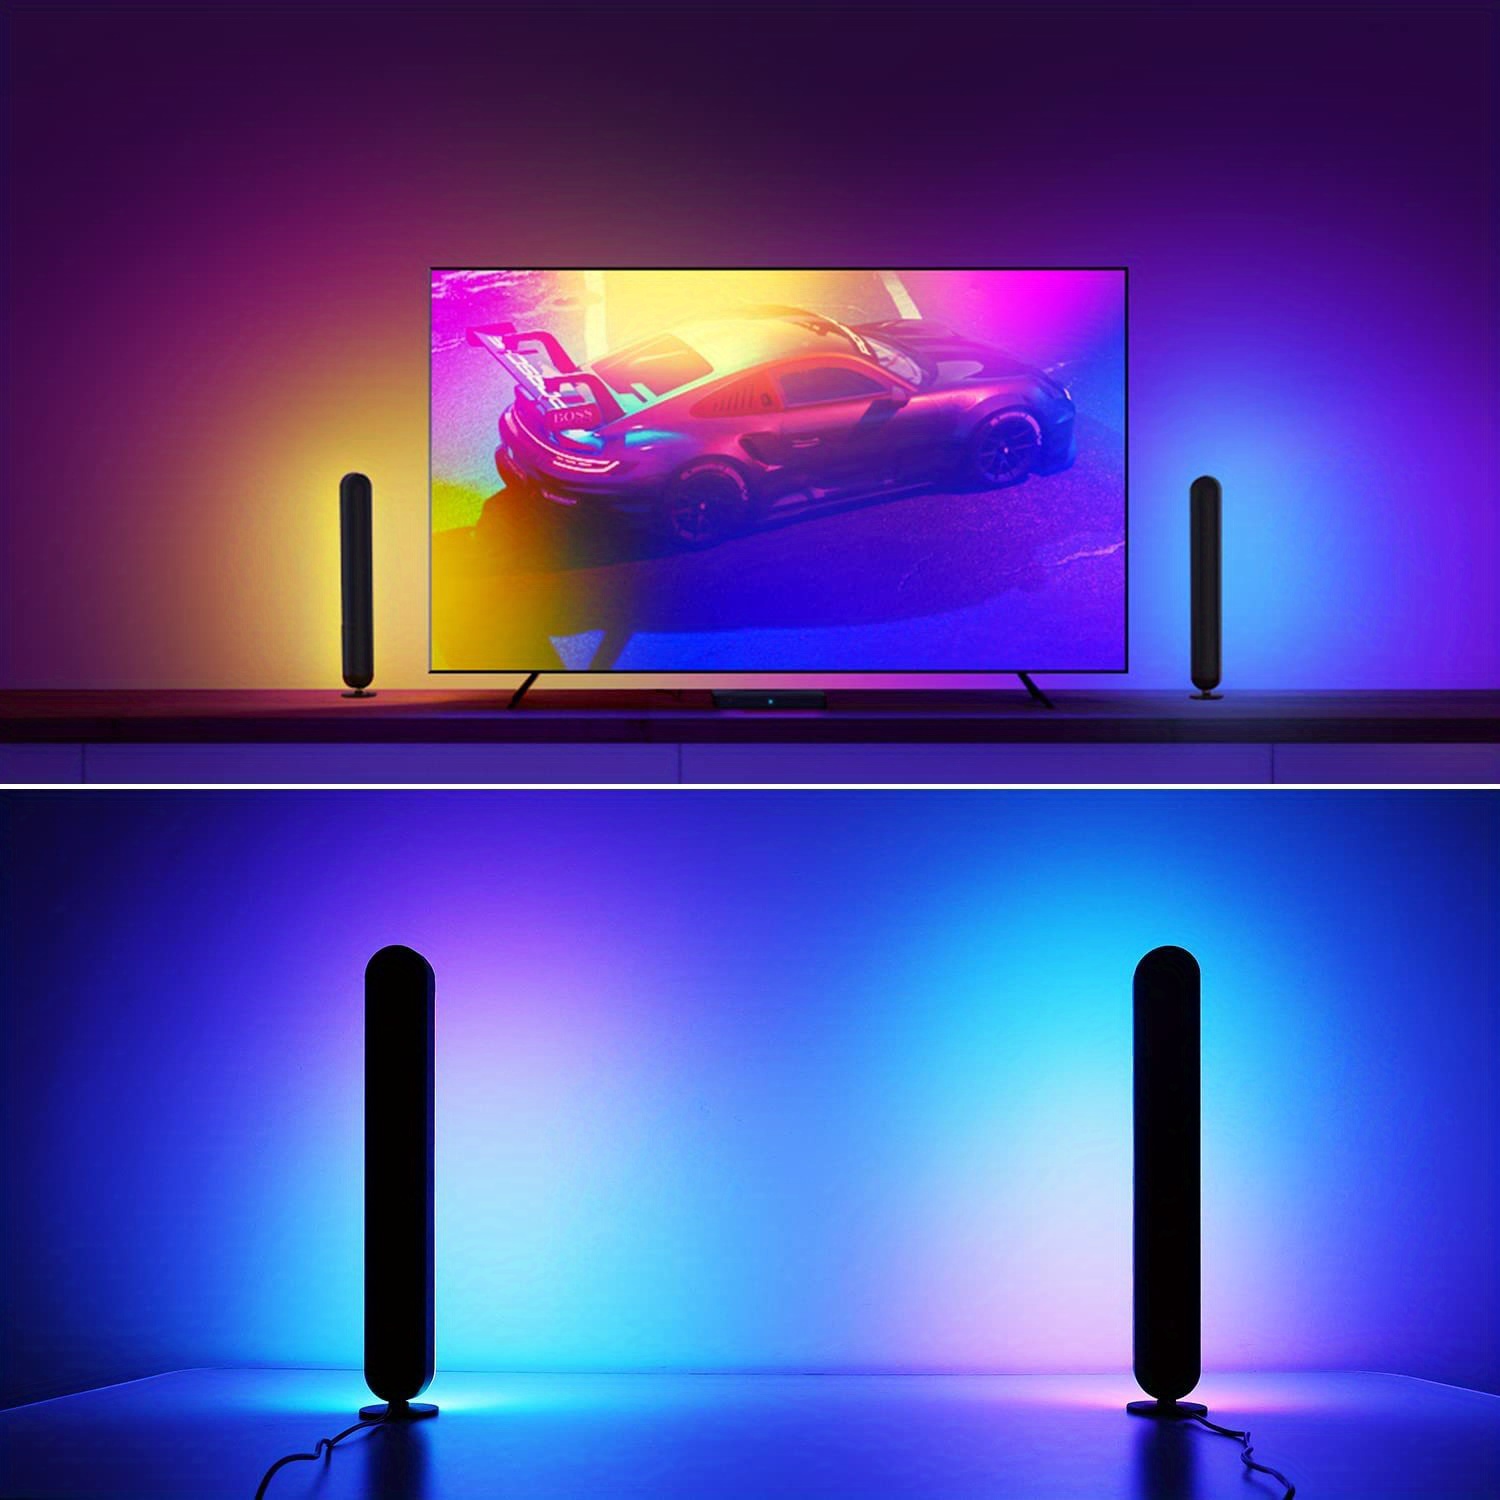 2 pack rgbic tuya smart led light bars work with alexa and google assistant with 2 4g remote control gaming lights backlights rgbic wifi tv backlights with scene modes and music modes for gaming pictures pc tv room decor gaming setup details 6